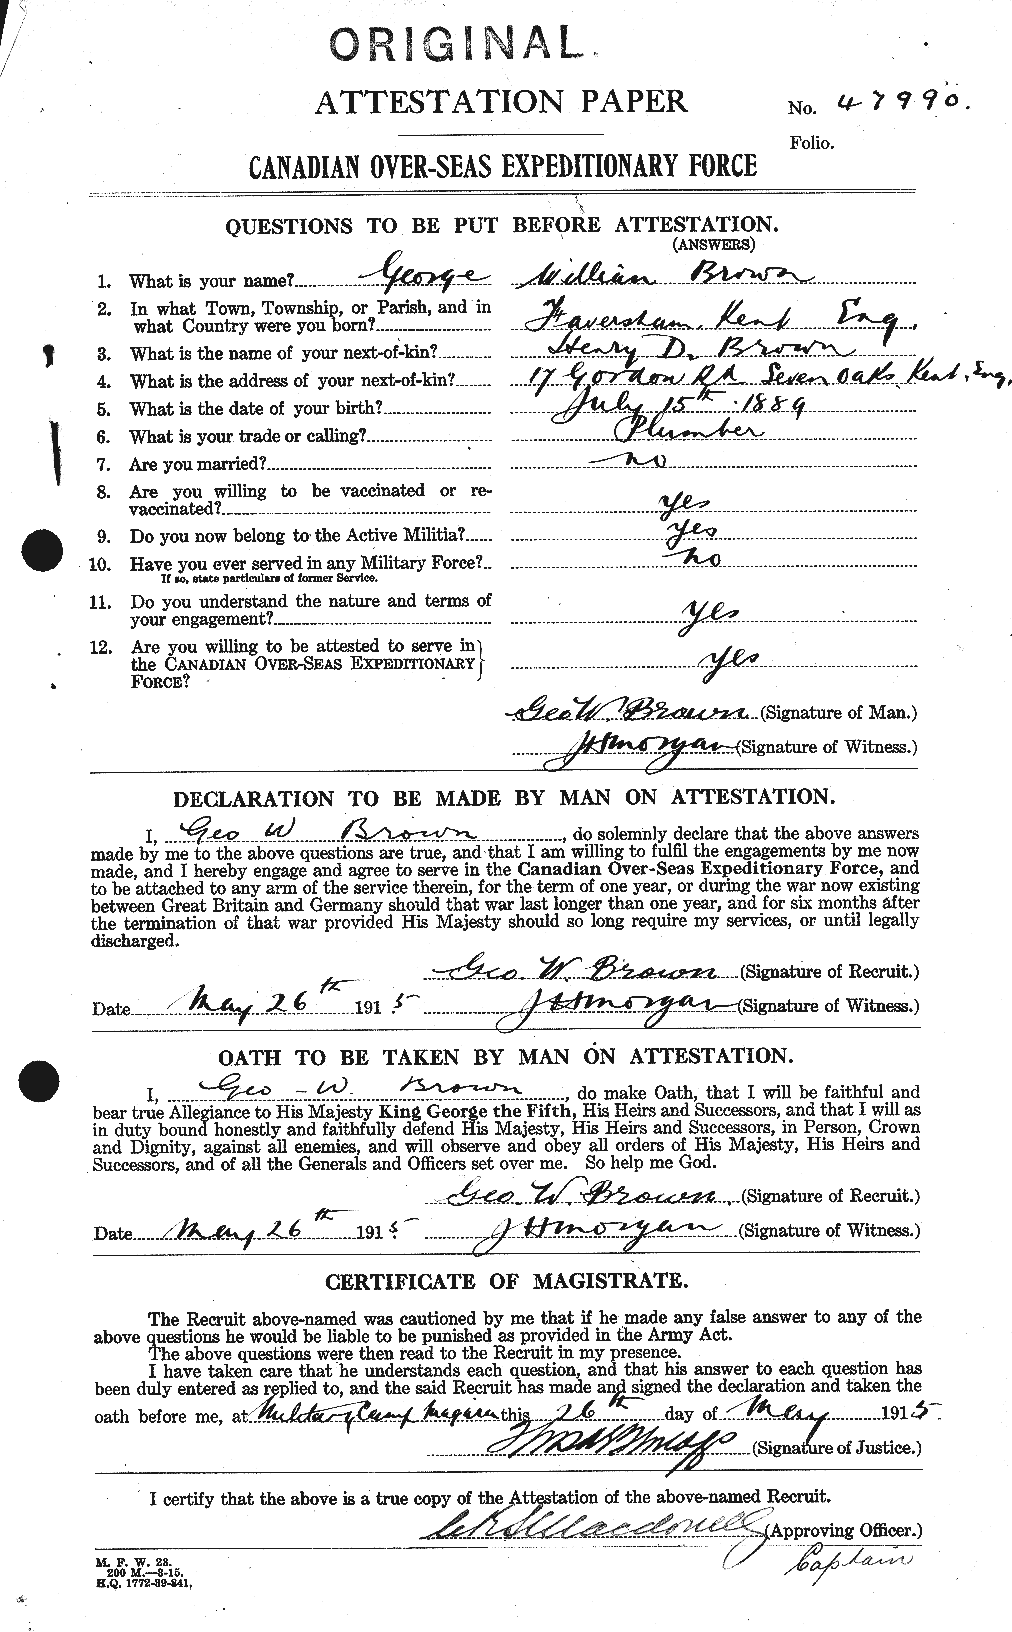 Personnel Records of the First World War - CEF 262593a